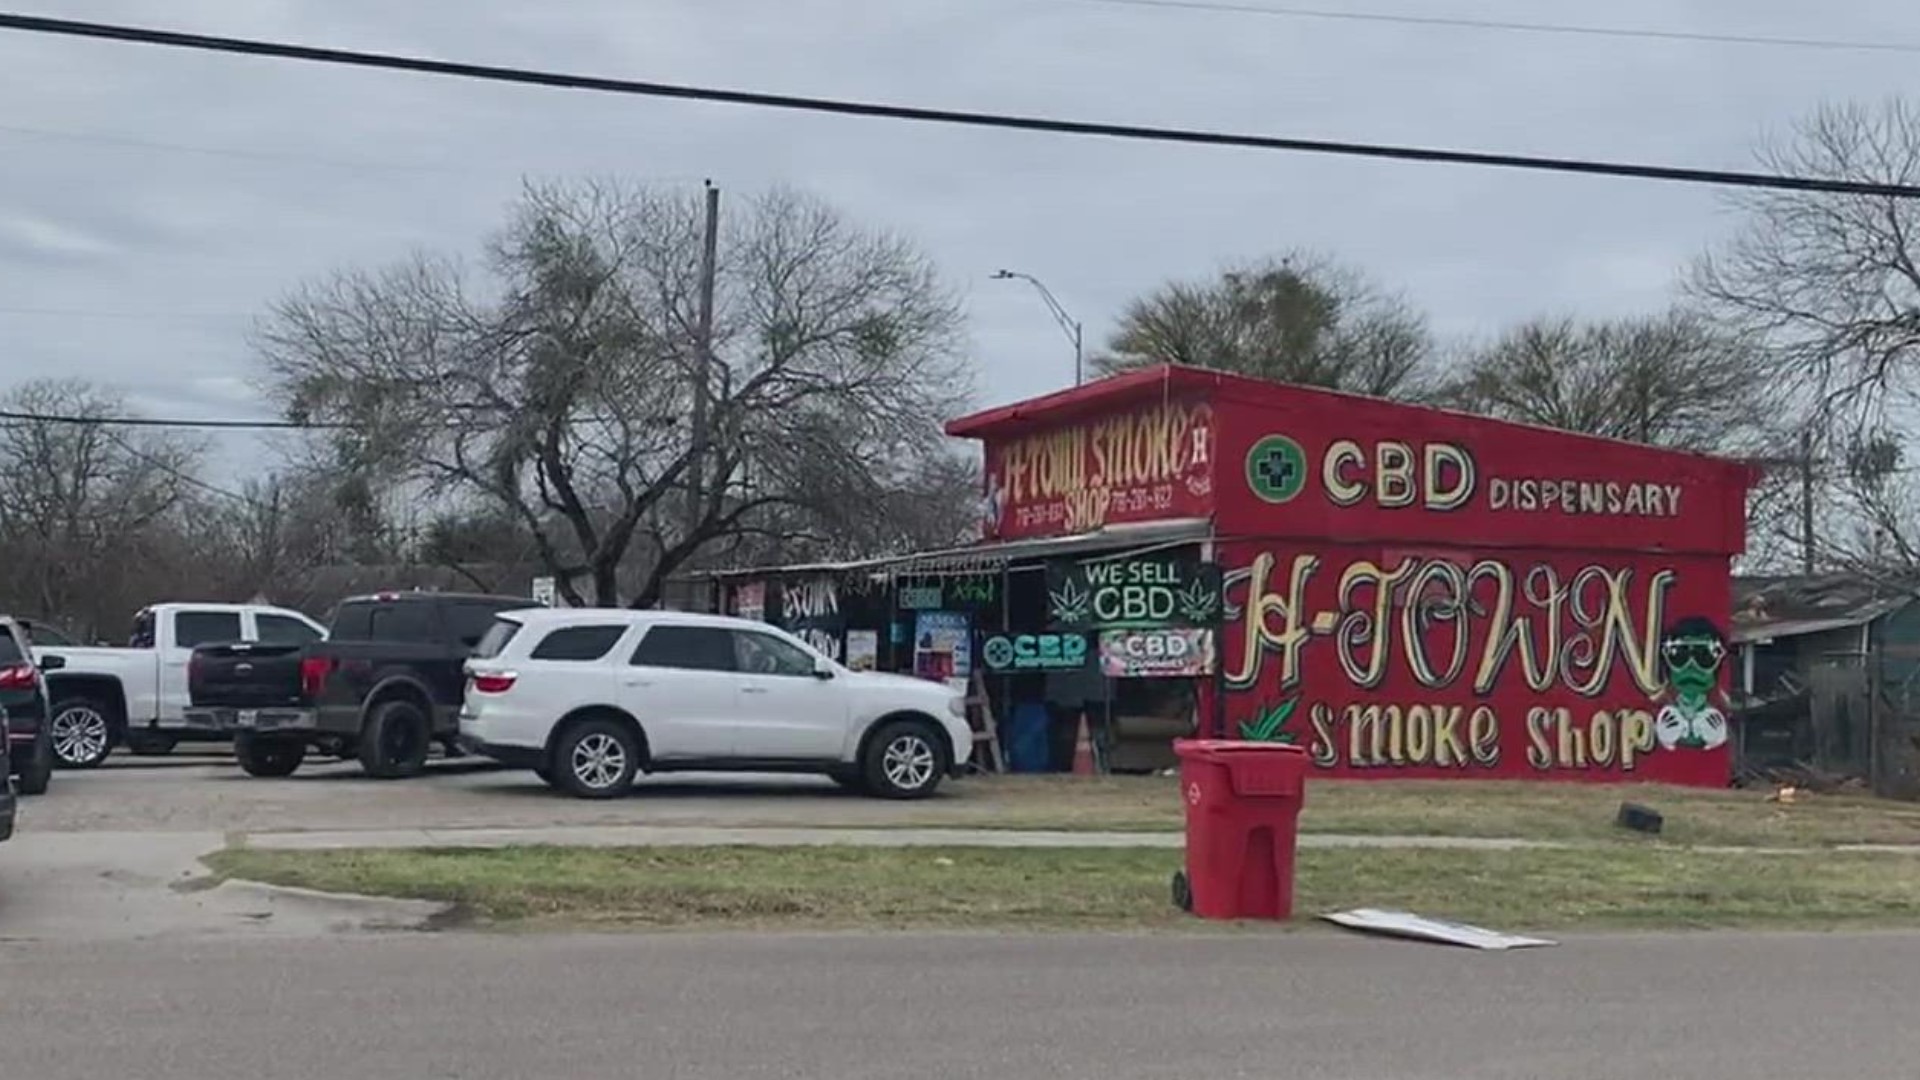 Robstown police and the Nueces County Criminal Interdiction Unit discovered guns, marijuana and other illegal substances at an H-Town Smoke Shop.